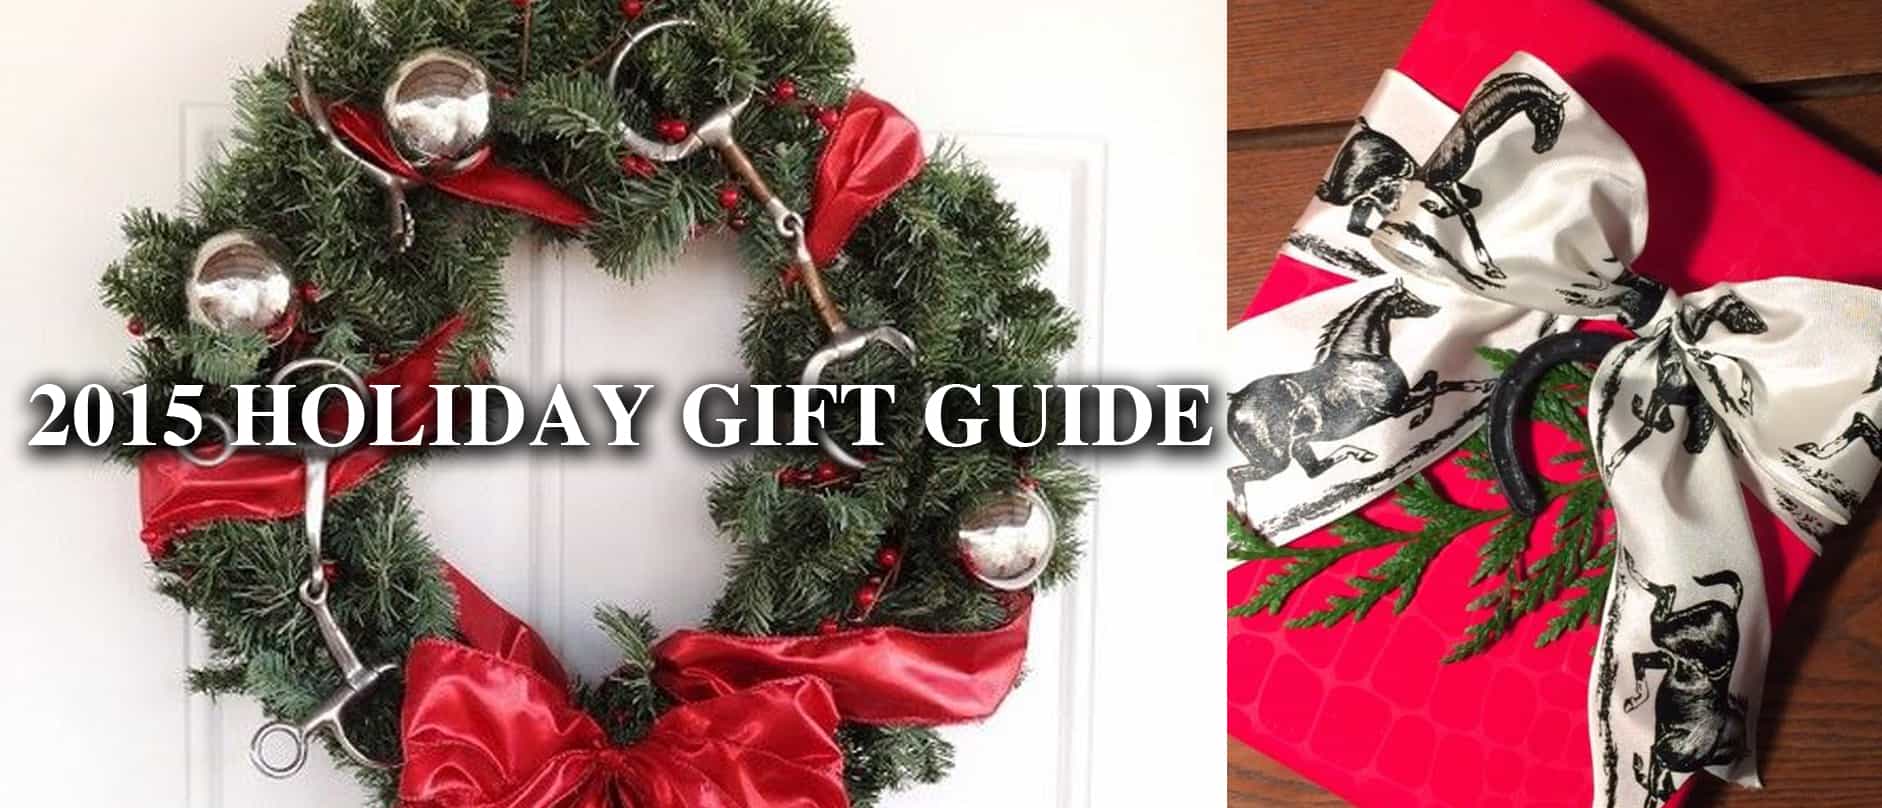 Equestrian Stylist 2015 Holiday Gift Guide